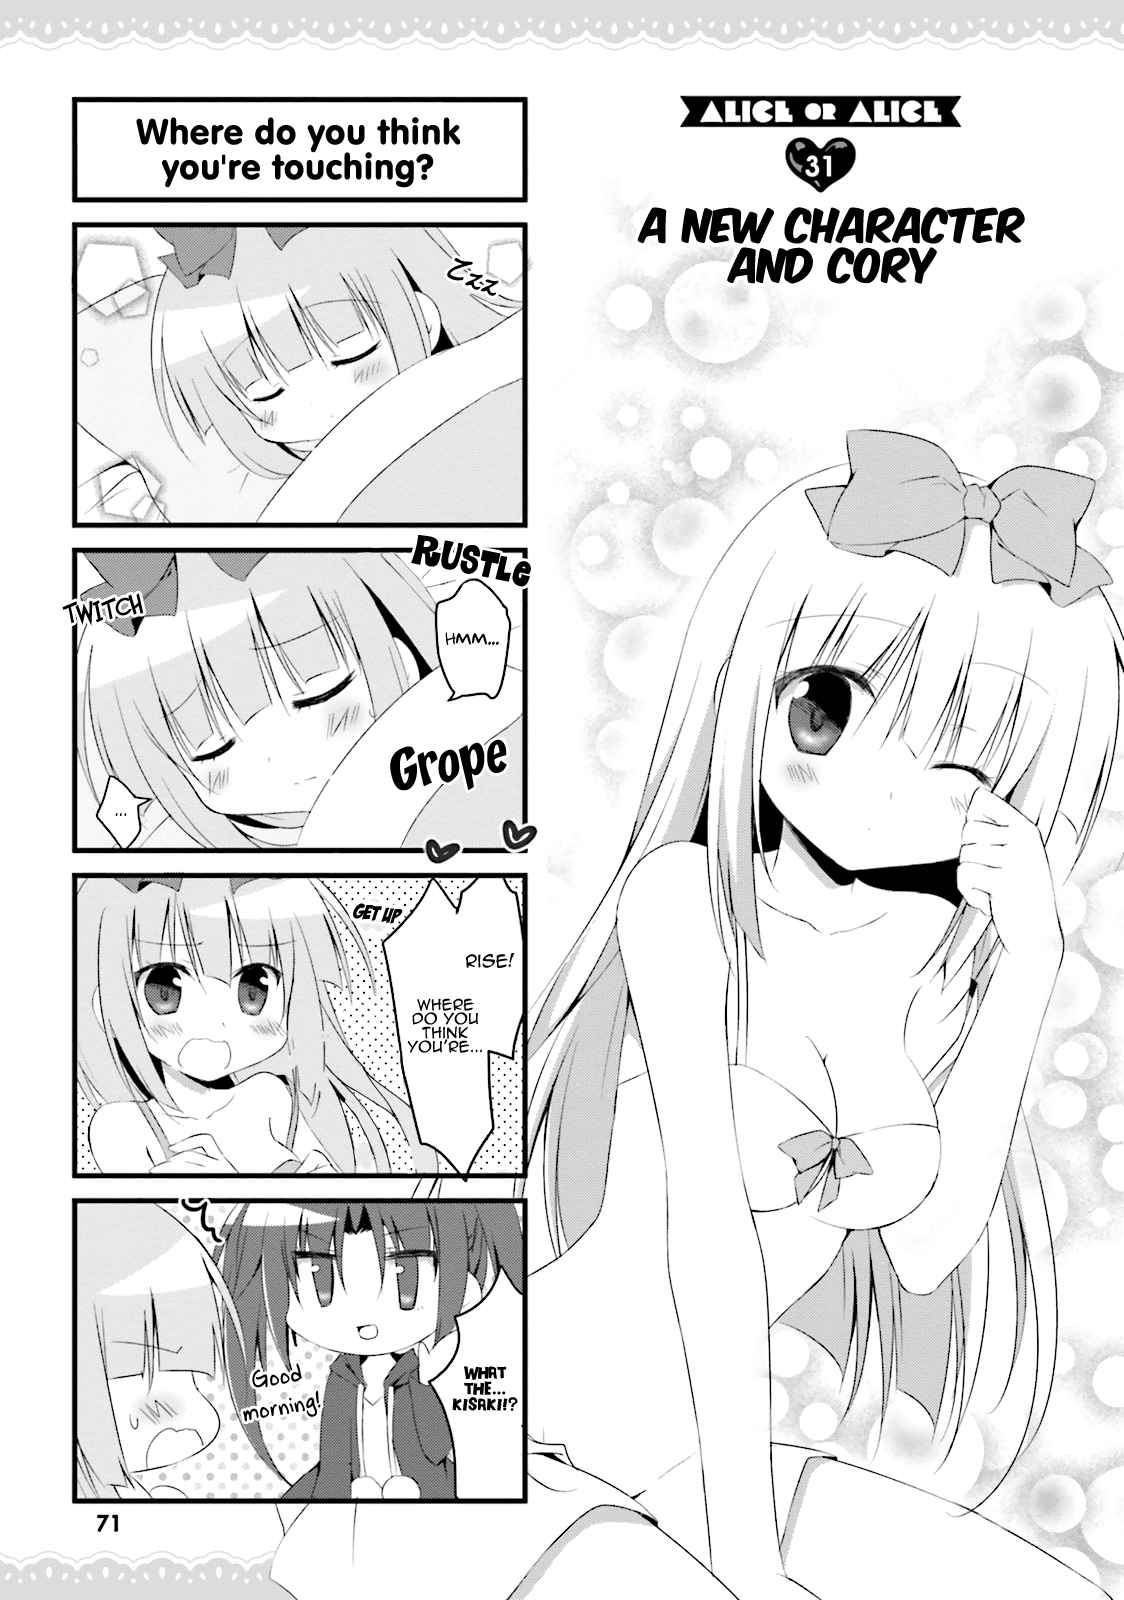 Alice or Alice Vol. 3 Ch. 31 A new character and Cory